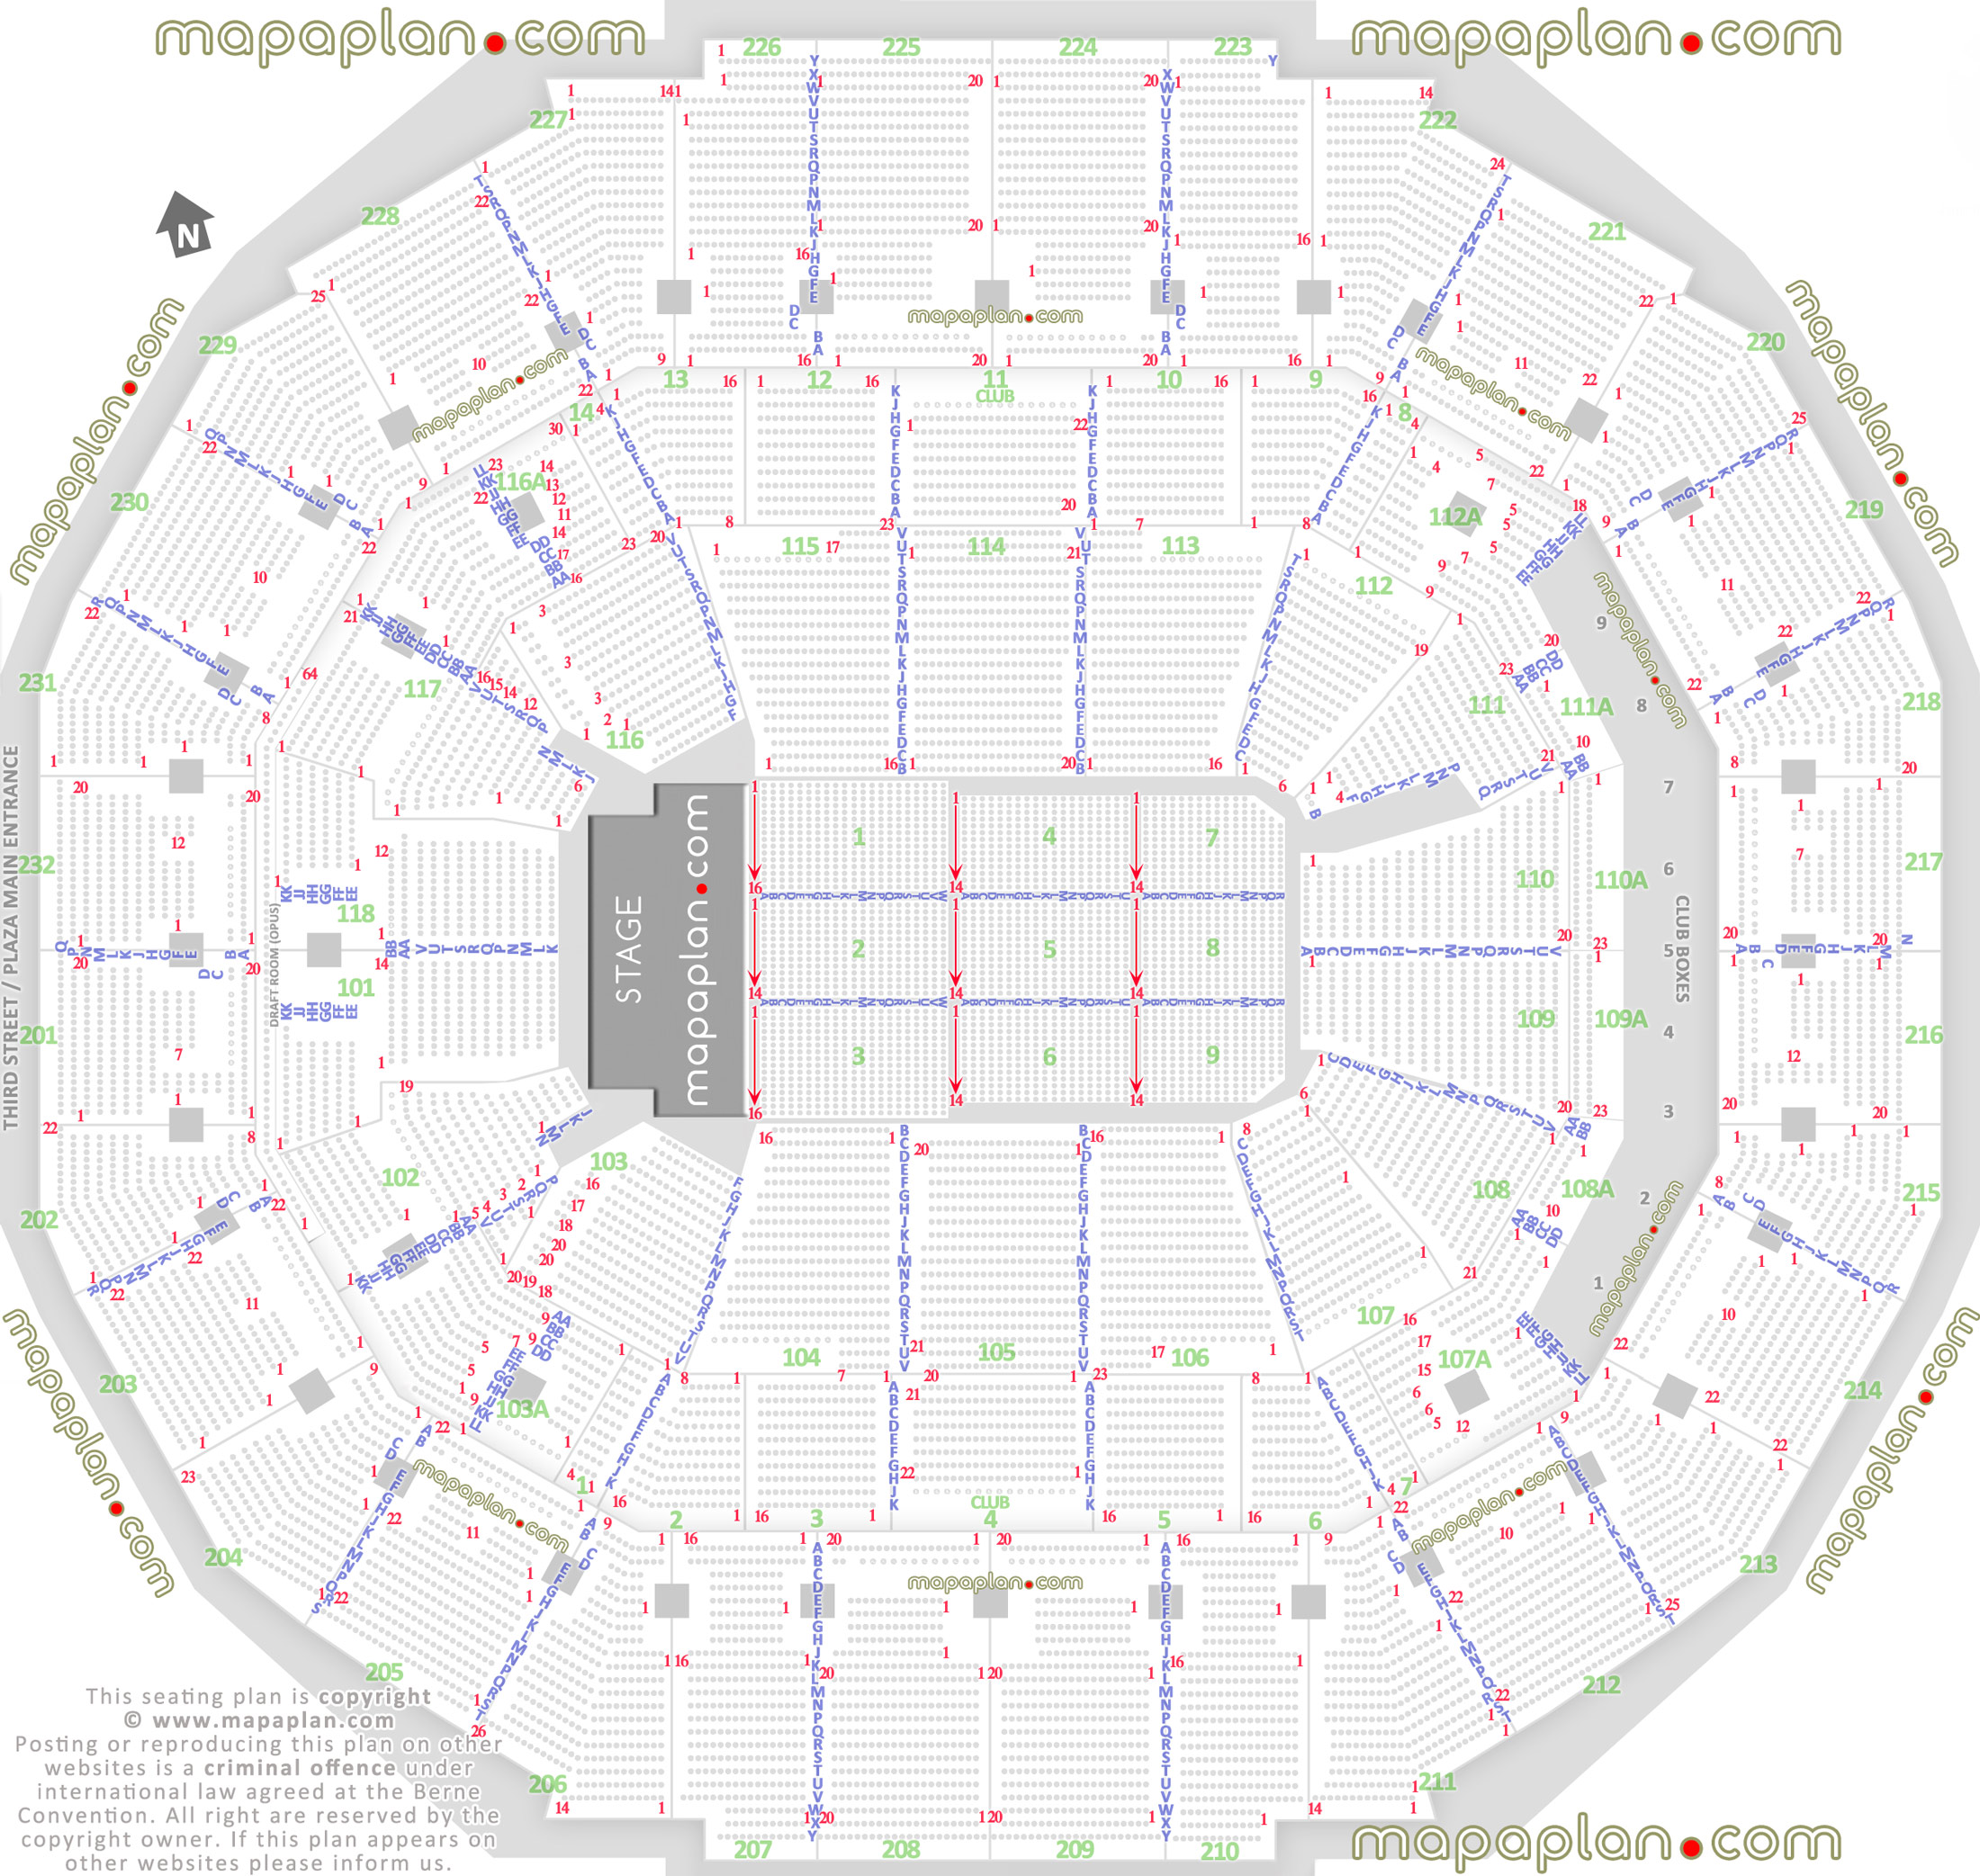 detailed seat row numbers end stage concert sections floor plan map plaza club terrace level arena layout Memphis FedExForum seating chart